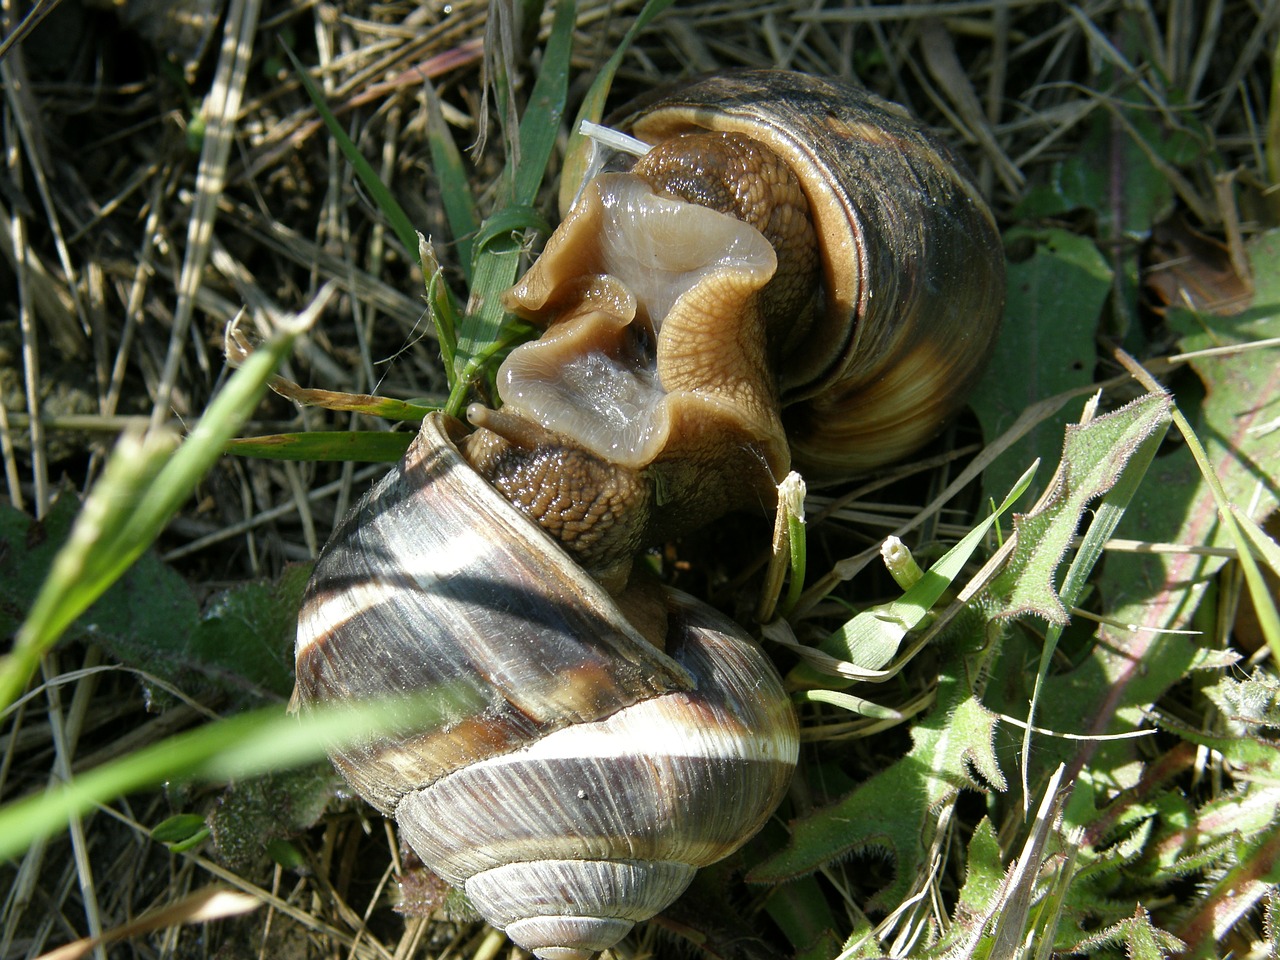 snails copulation mating free photo